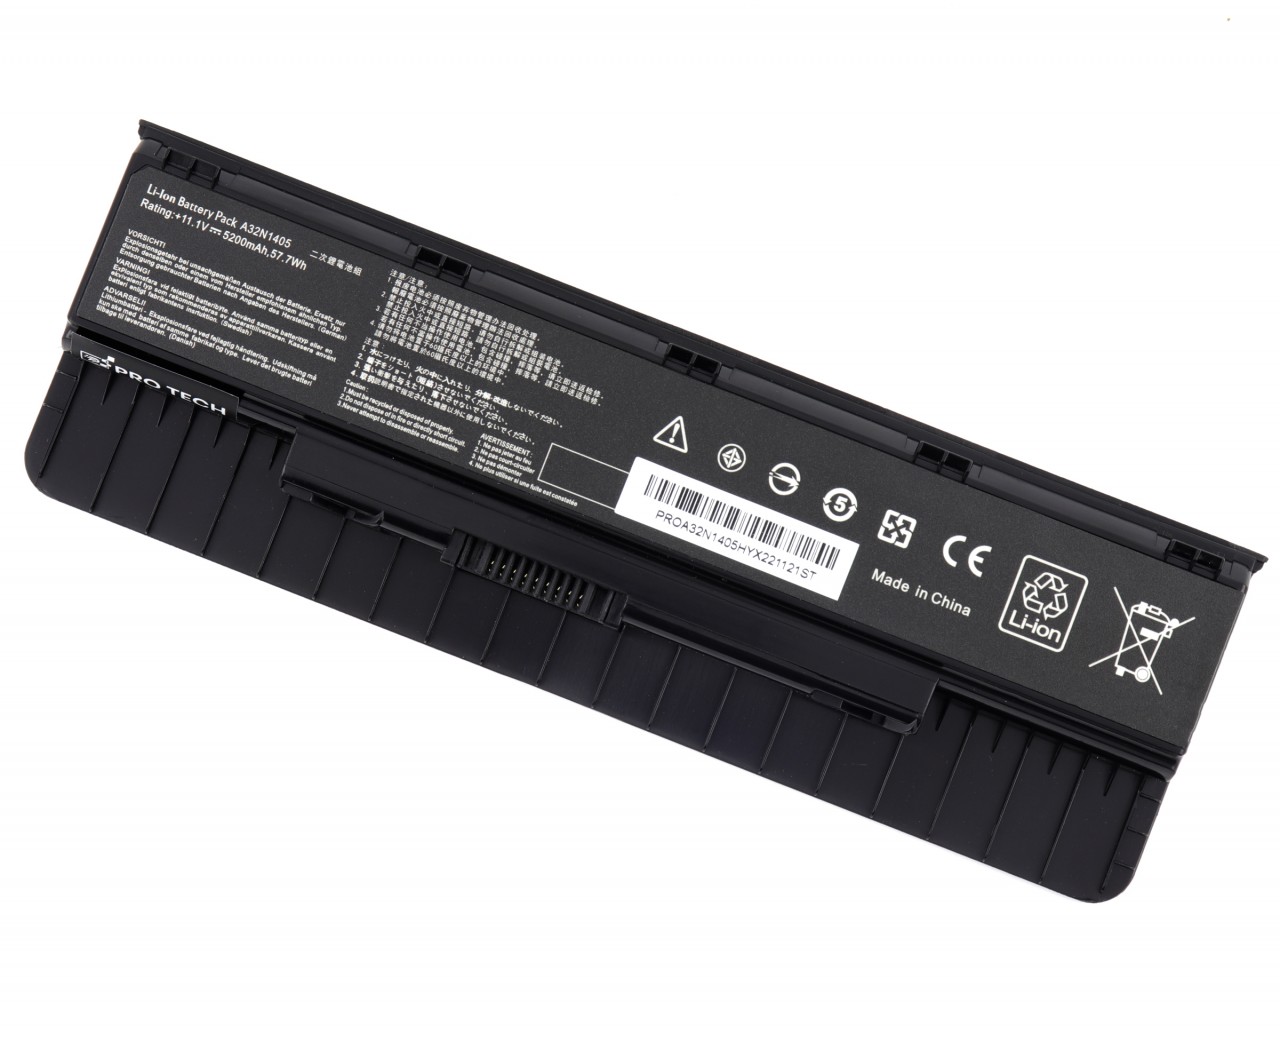 Baterie Asus N46JV 57.7Wh / 5200mAh Protech High Quality Replacement